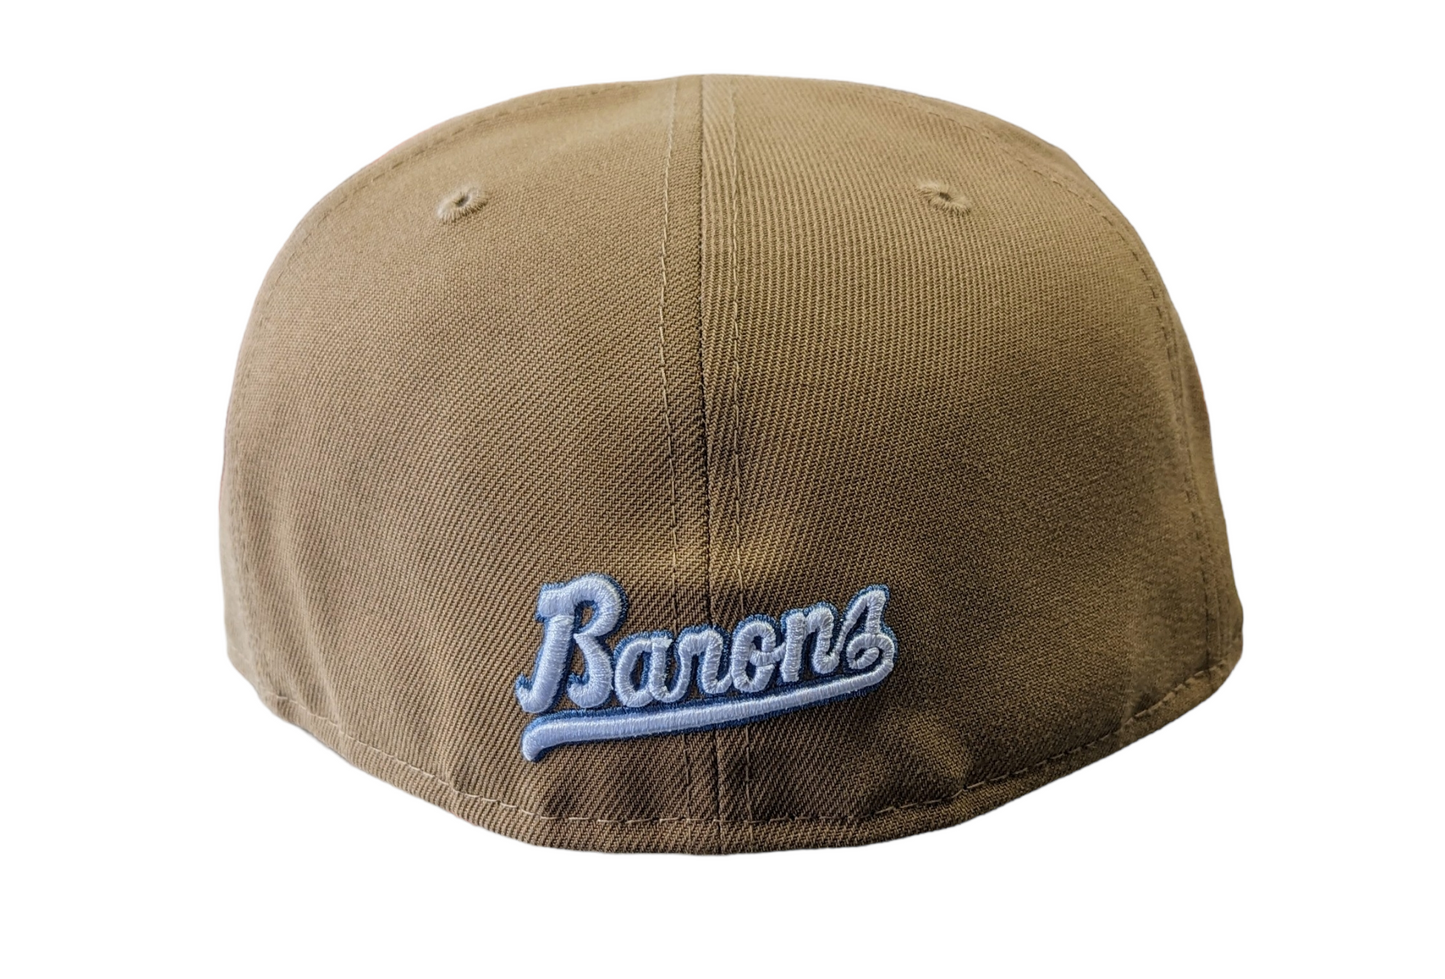 Birmingham Barons "Biff" New Era Southern League Khaki/Black/Olive 59FIFTY Fitted Hat